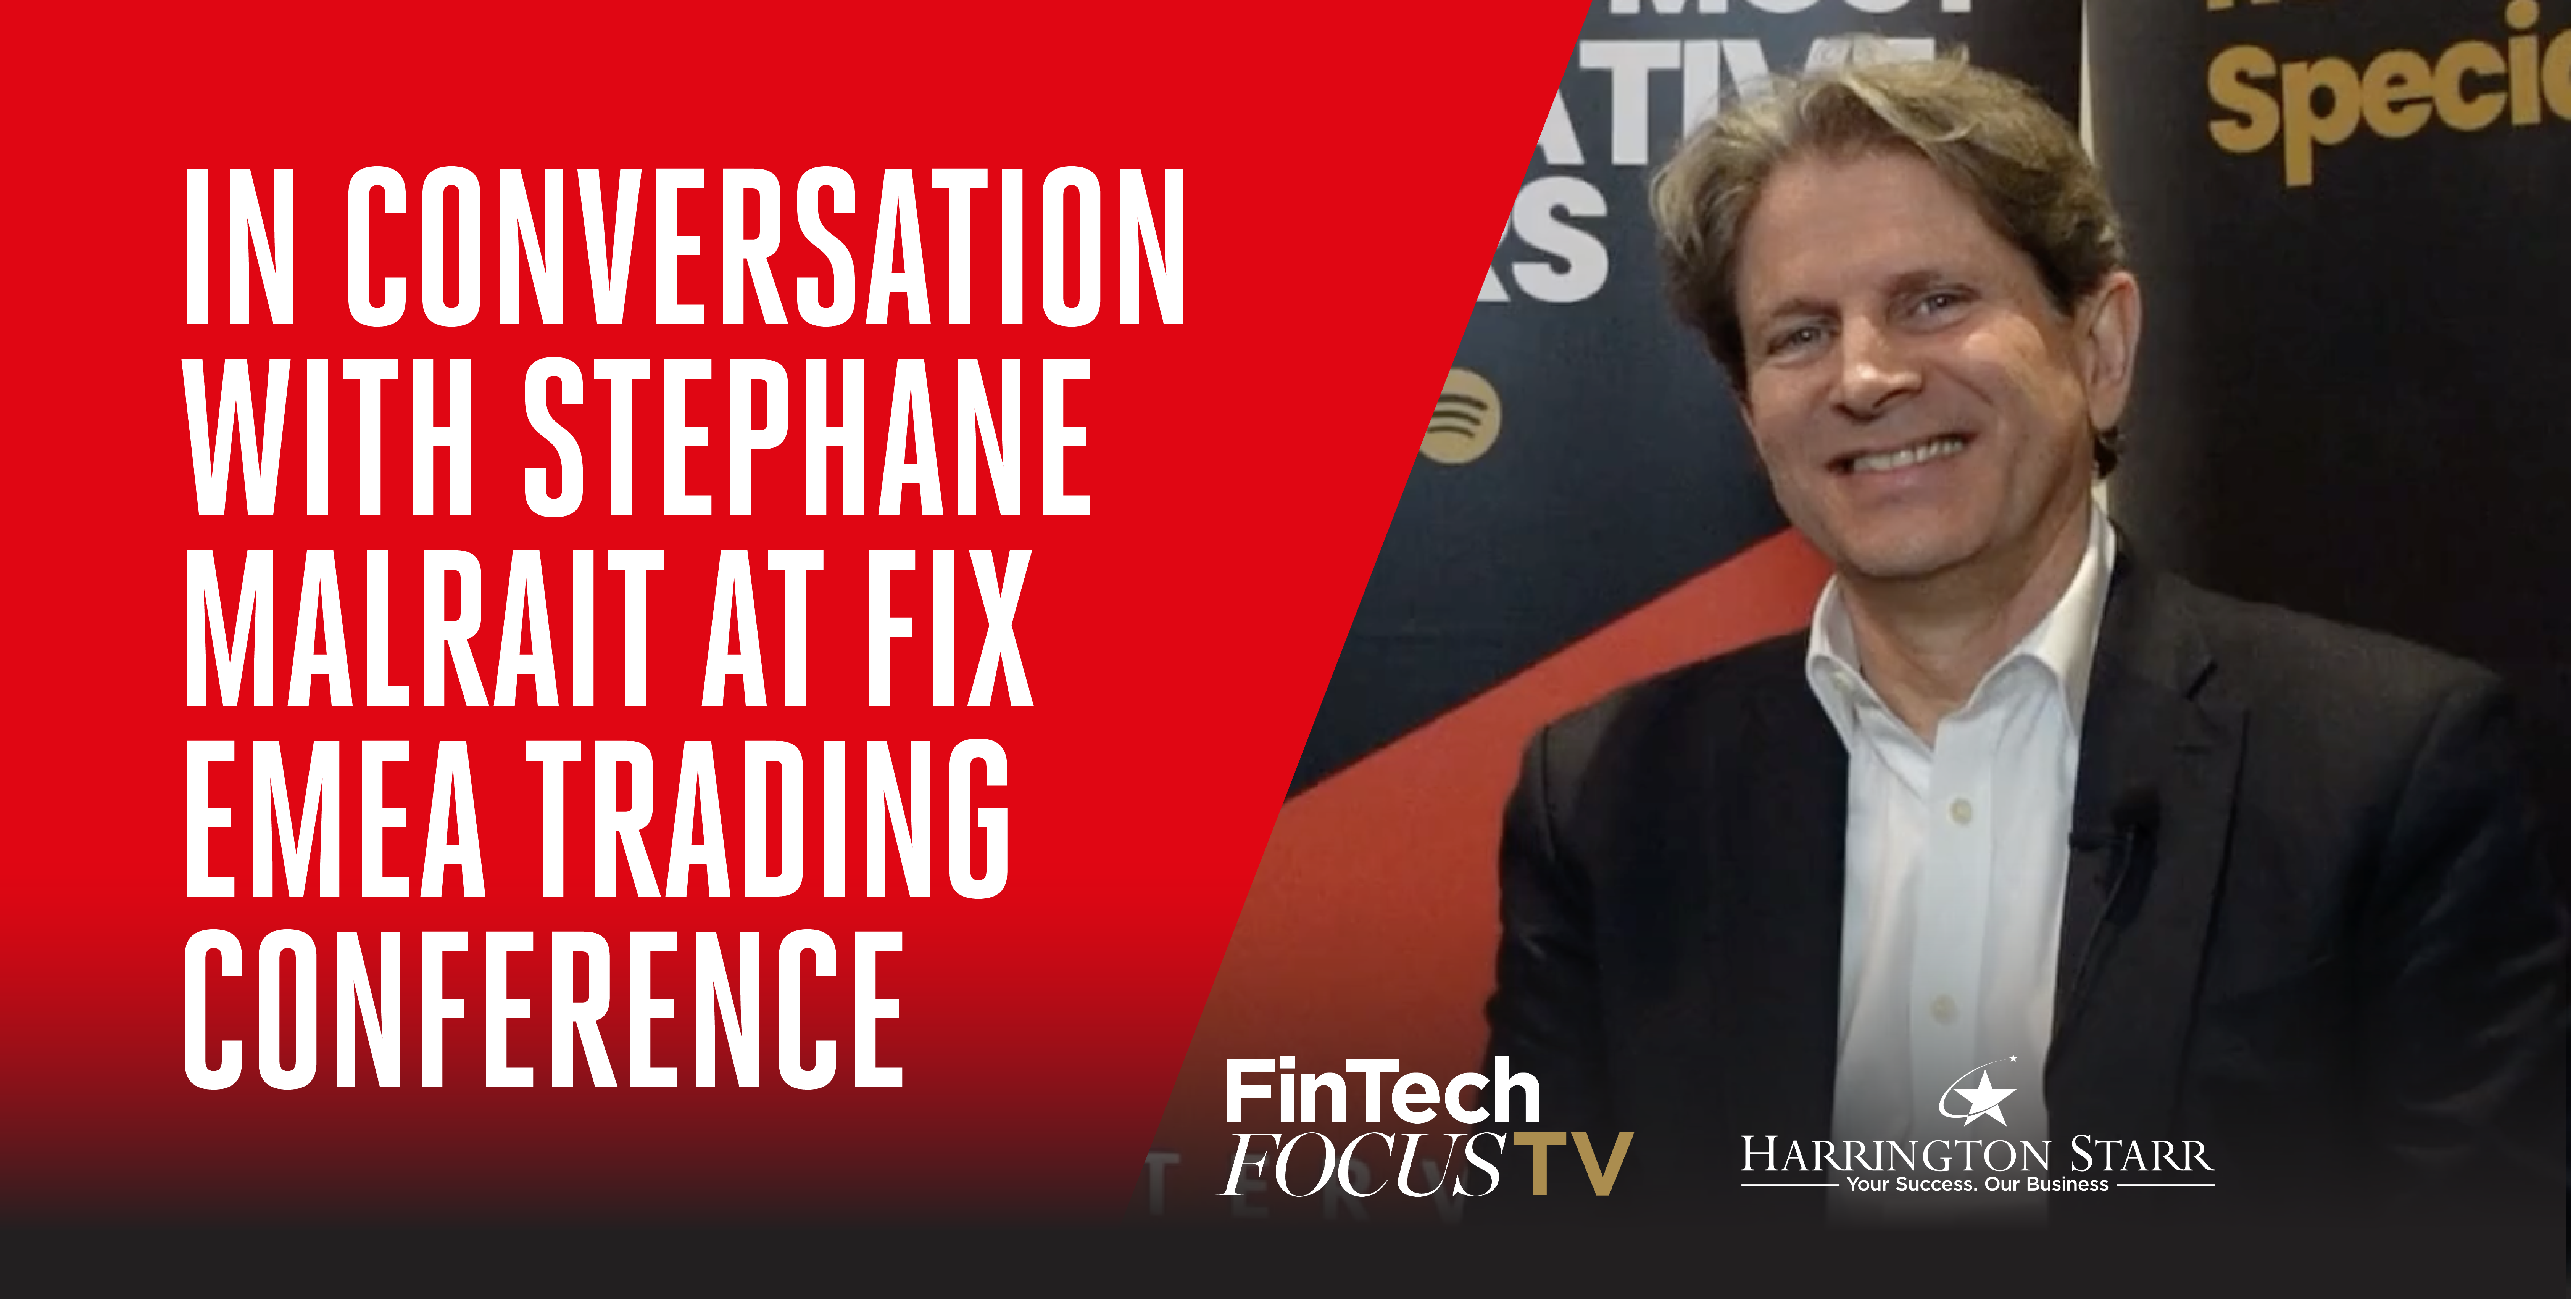 In Conversation with Stephane Malrait at FIX EMEA Trading Conference